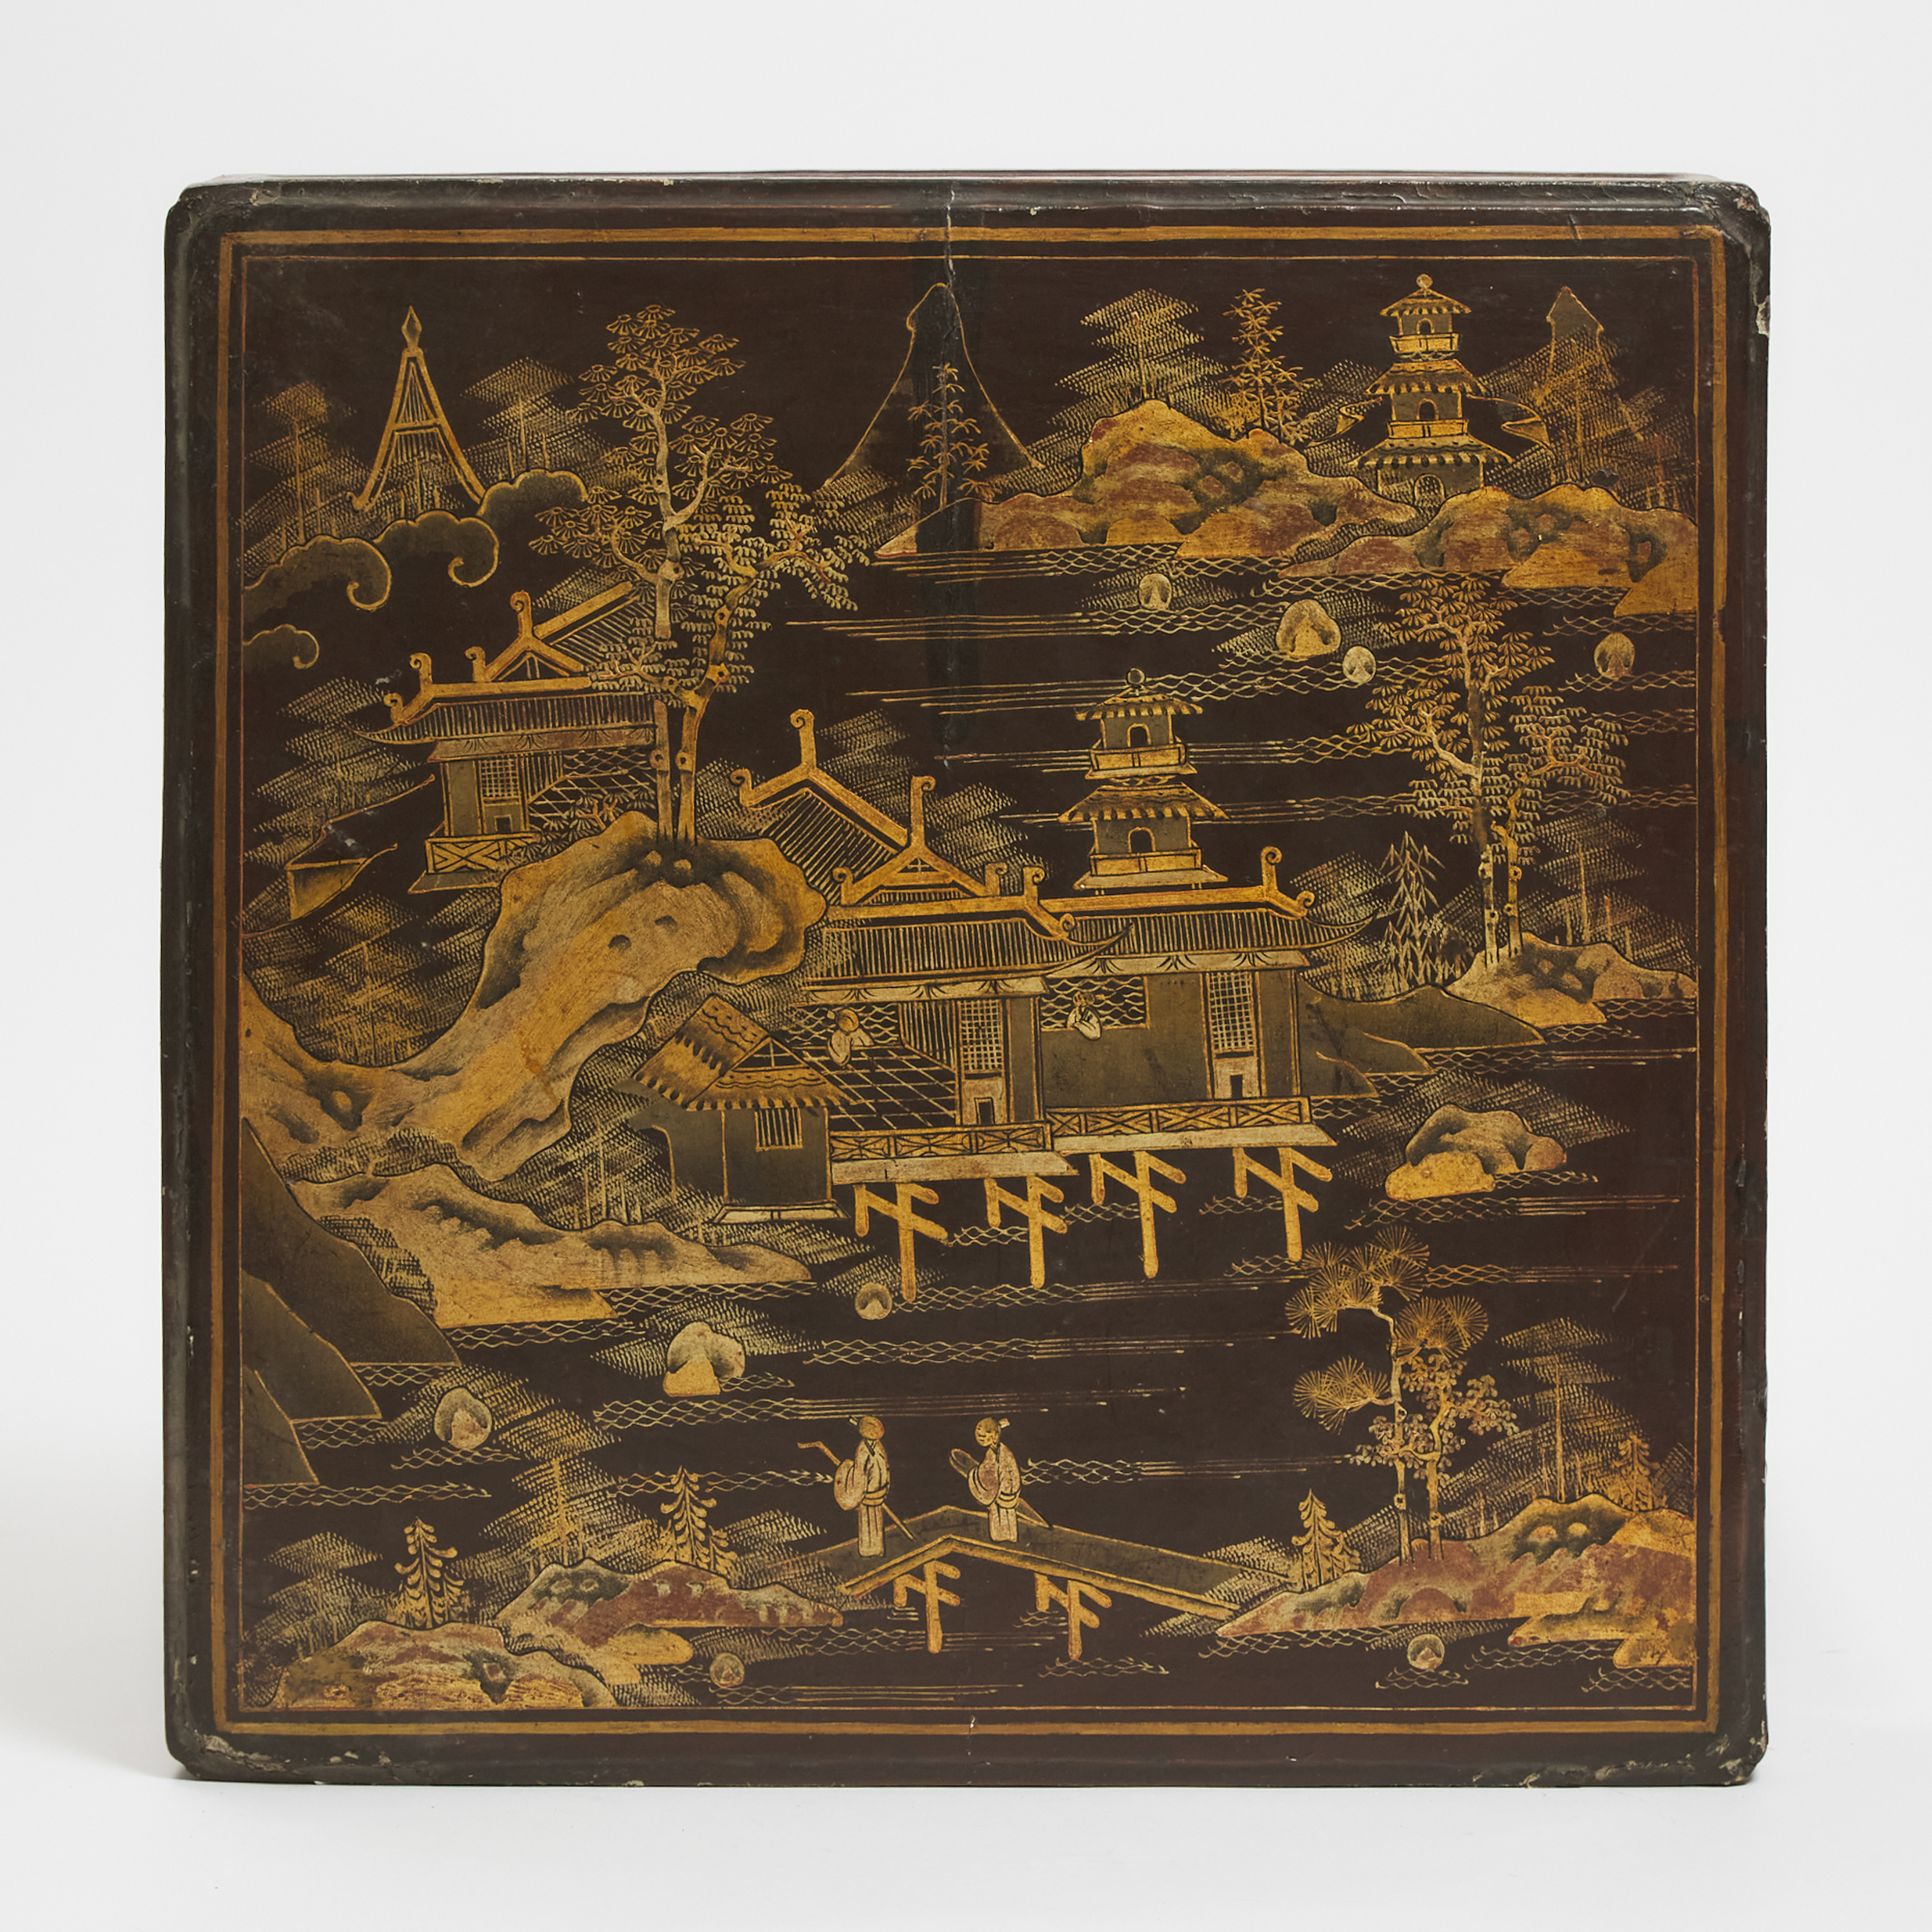 A Chinese Gilt Lacquer Square Box and Cover, Qing Dynasty, 19th Century